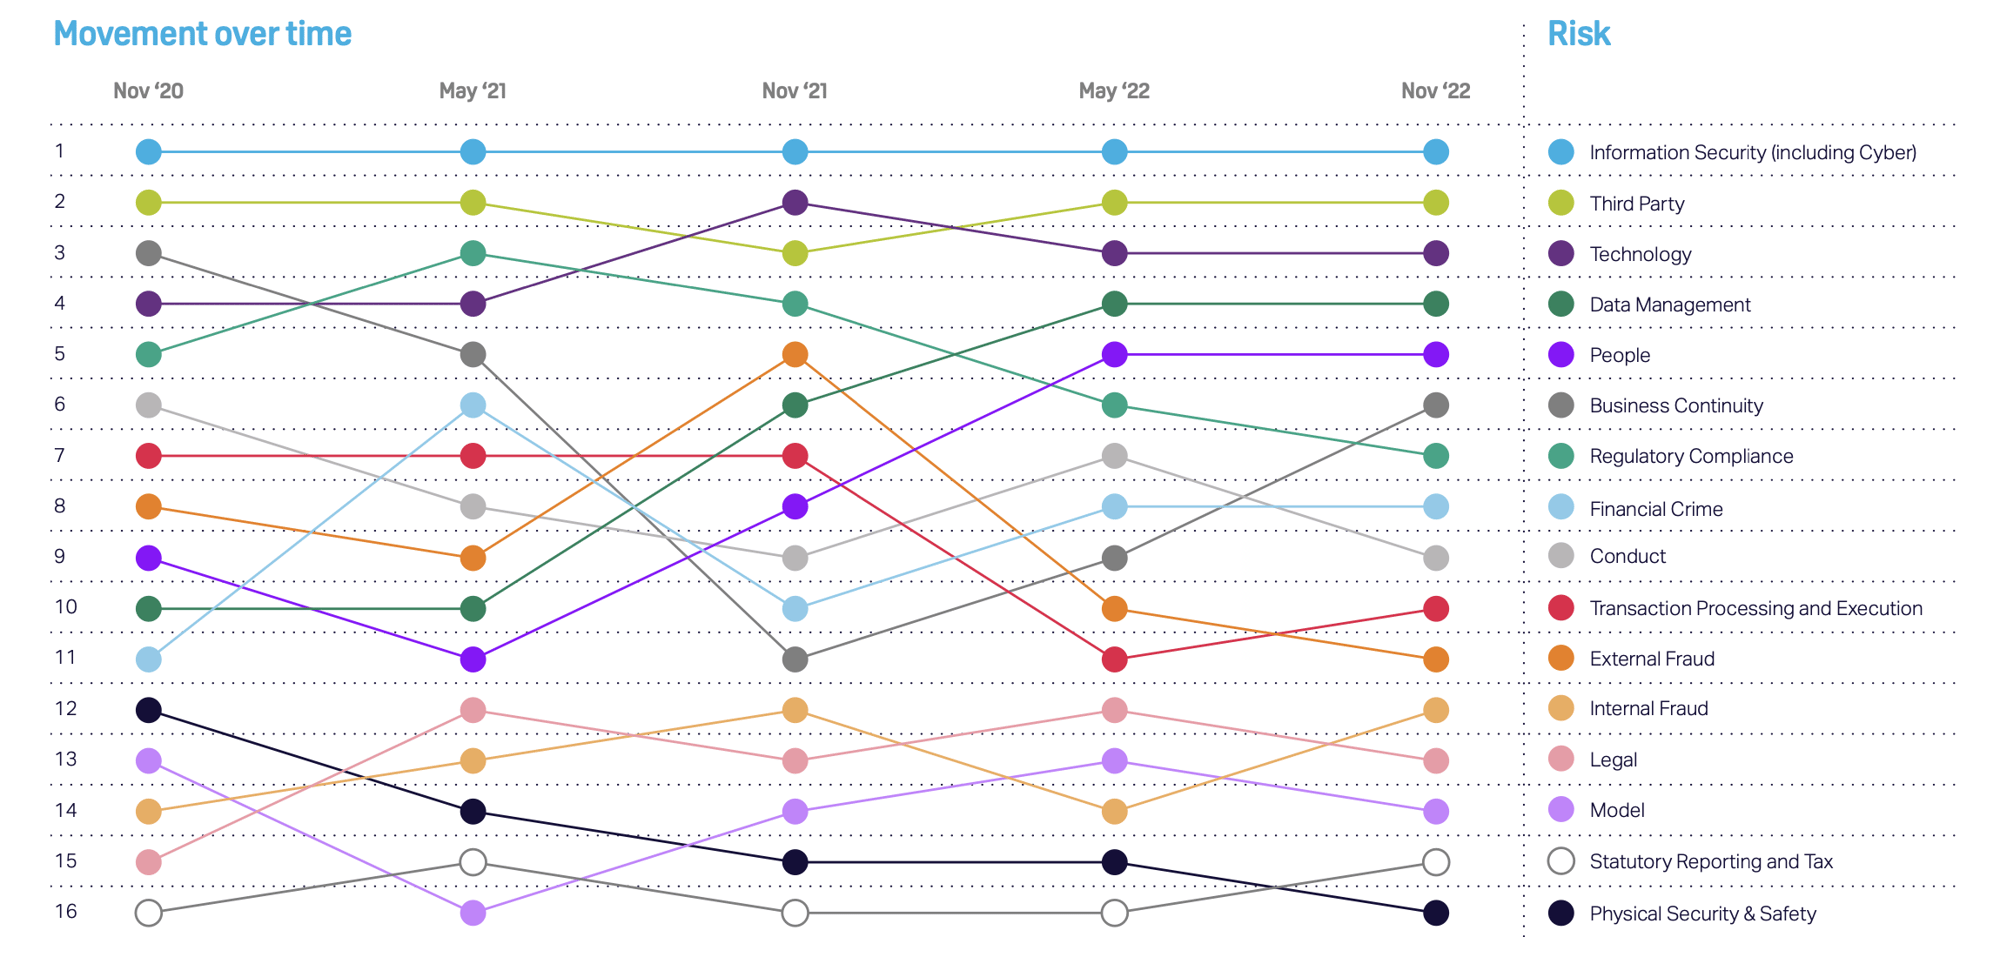 Chart showing top 16 risks and how their rankings have changed from November 2020 to November 2022